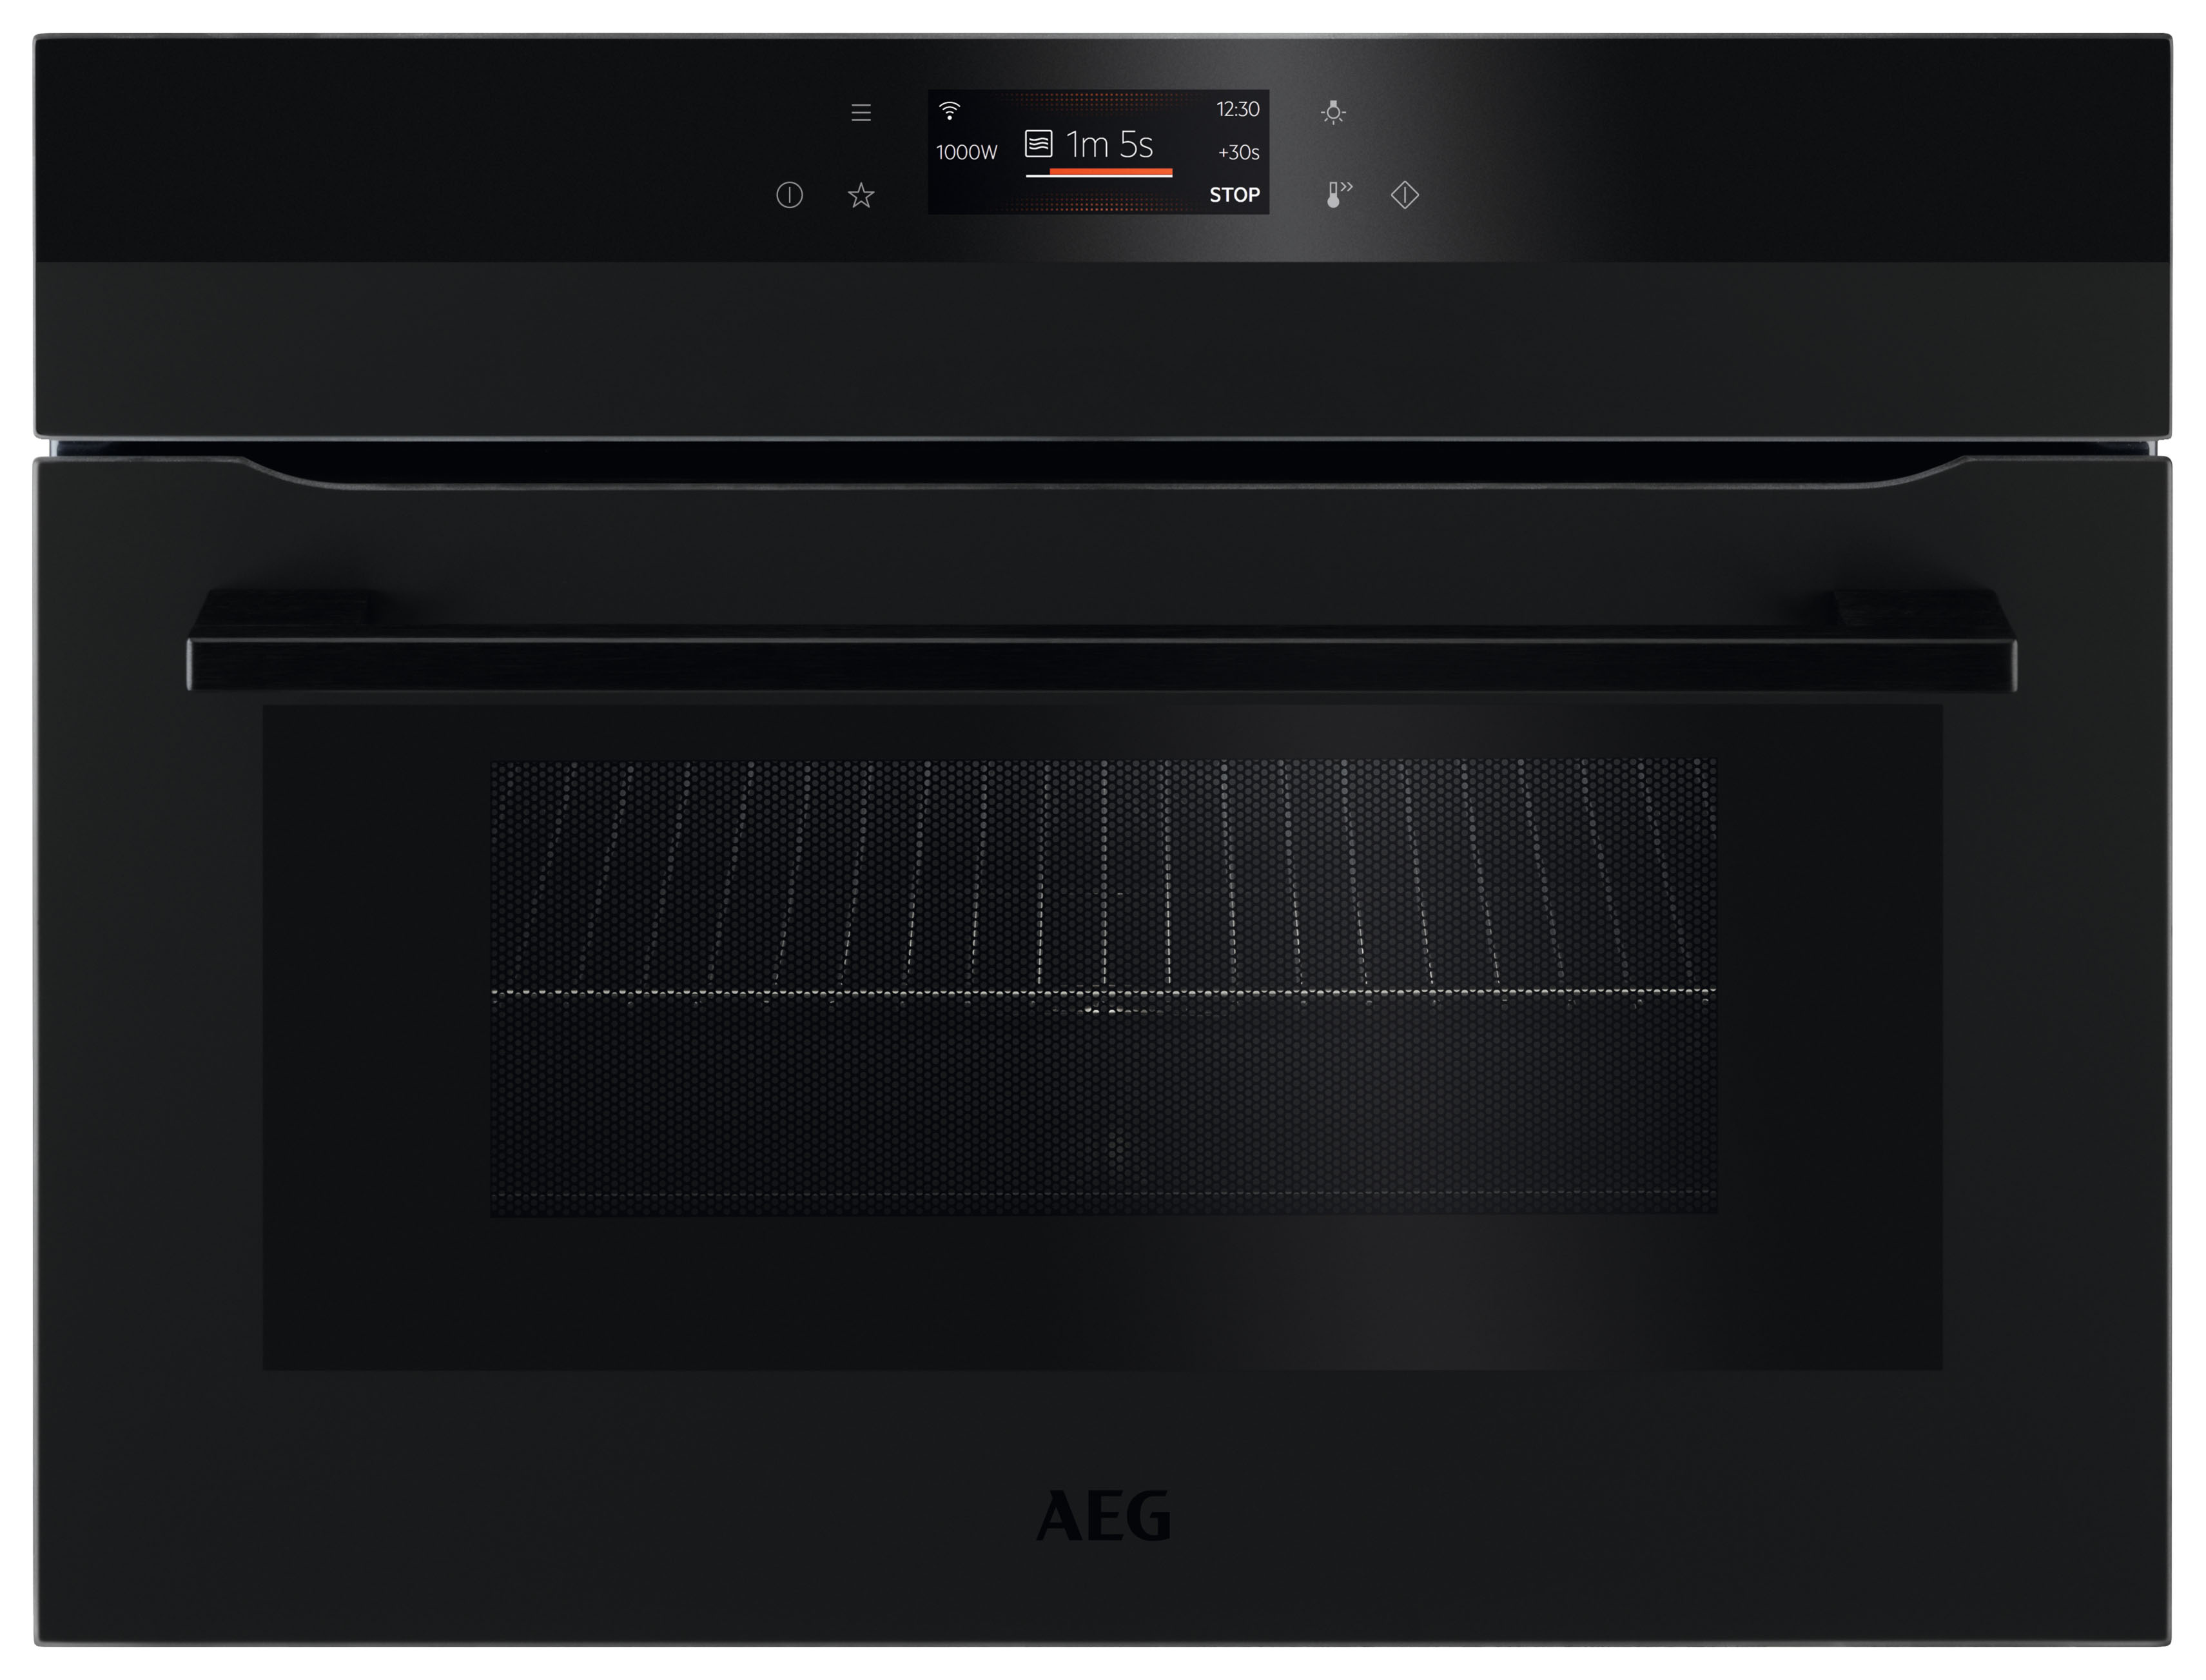 AEG KMK768080T 7000 Series Compact Oven with Microwave Function - Matt Black